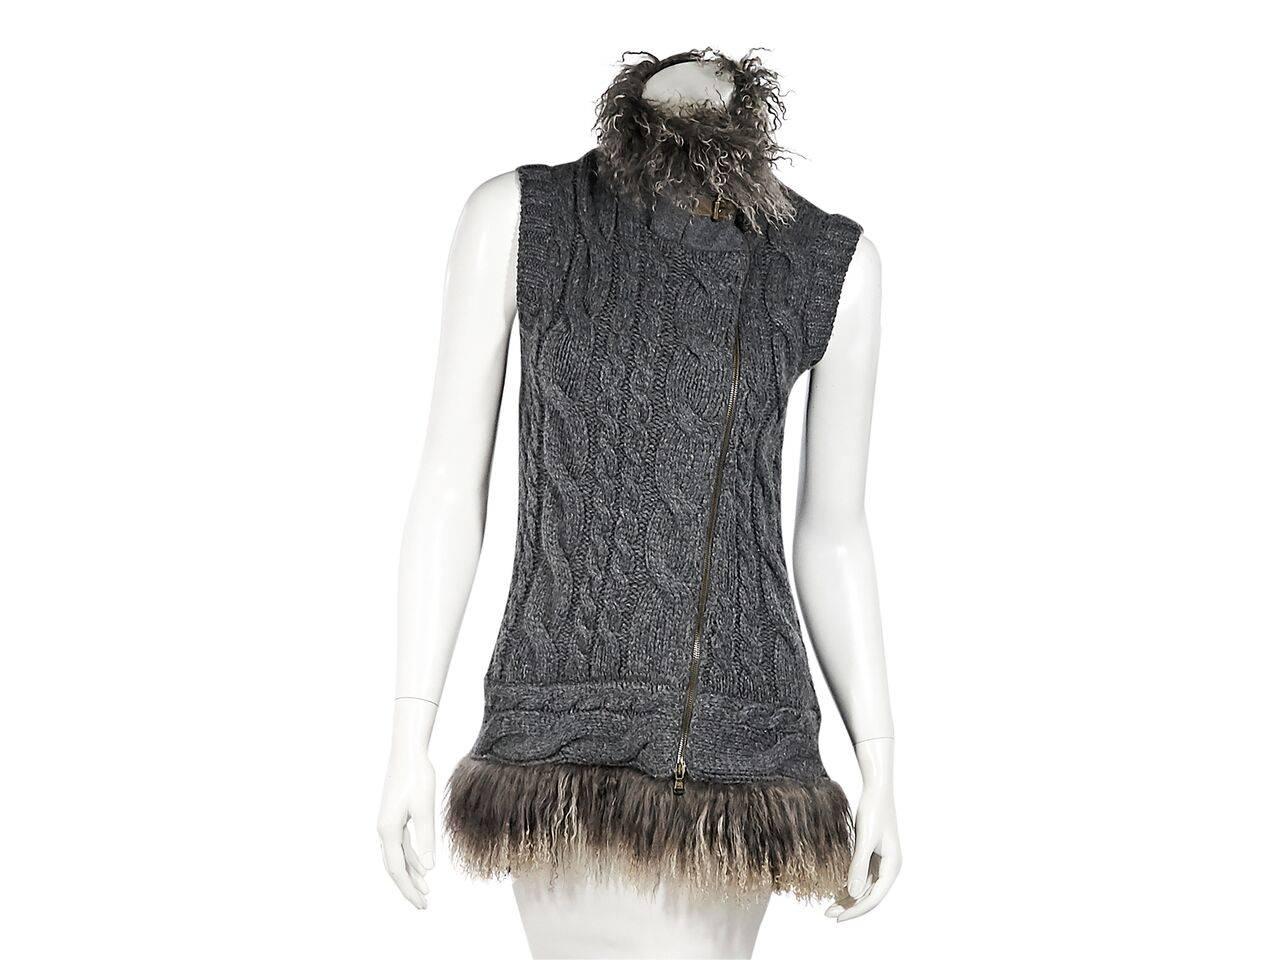 Product details:  Grey cashmere cable knit vest by Brunello Cucinelli.  Trimmed with Mongolian fur.  Stand collar.  Sleeveless.  Asymmetrical zip-front closure.    
Condition: Pre-owned. Very good.
Est. Retail $ 1,000.00